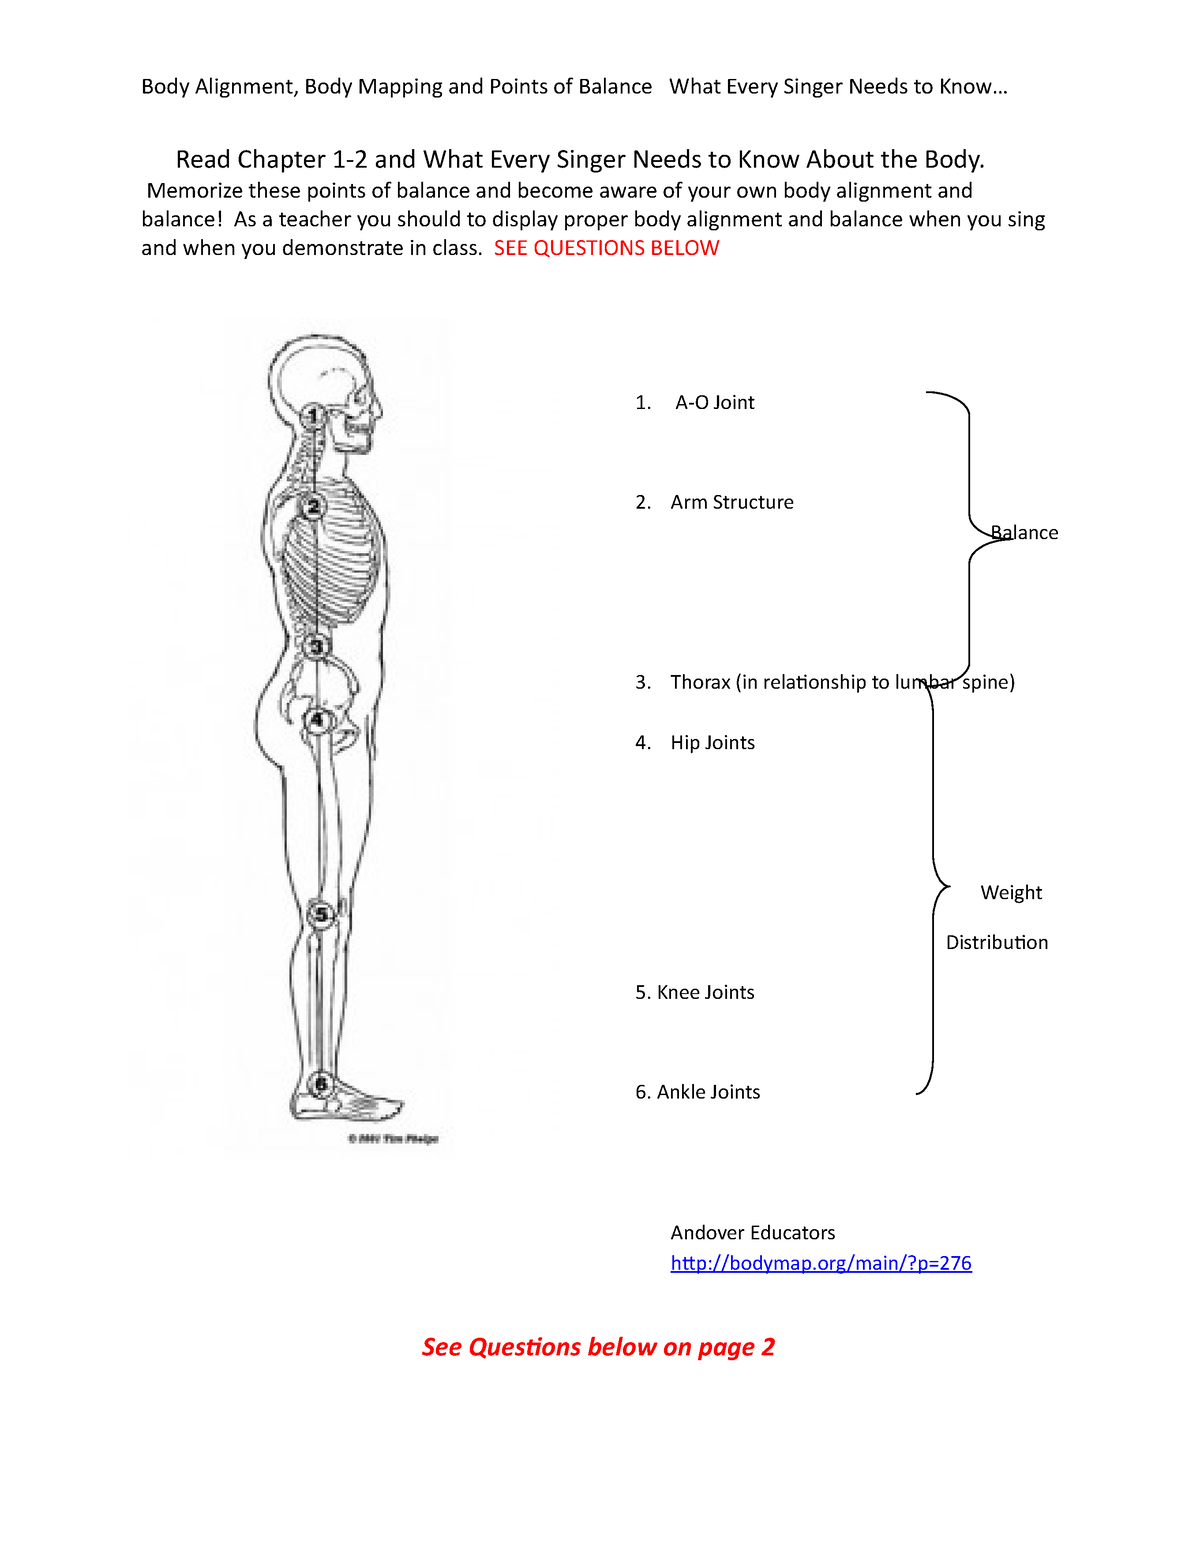 Body Mapping, Body Alignment and Balance Assignment - Read Chapter 1-2 and  What Every Singer Needs - Studocu